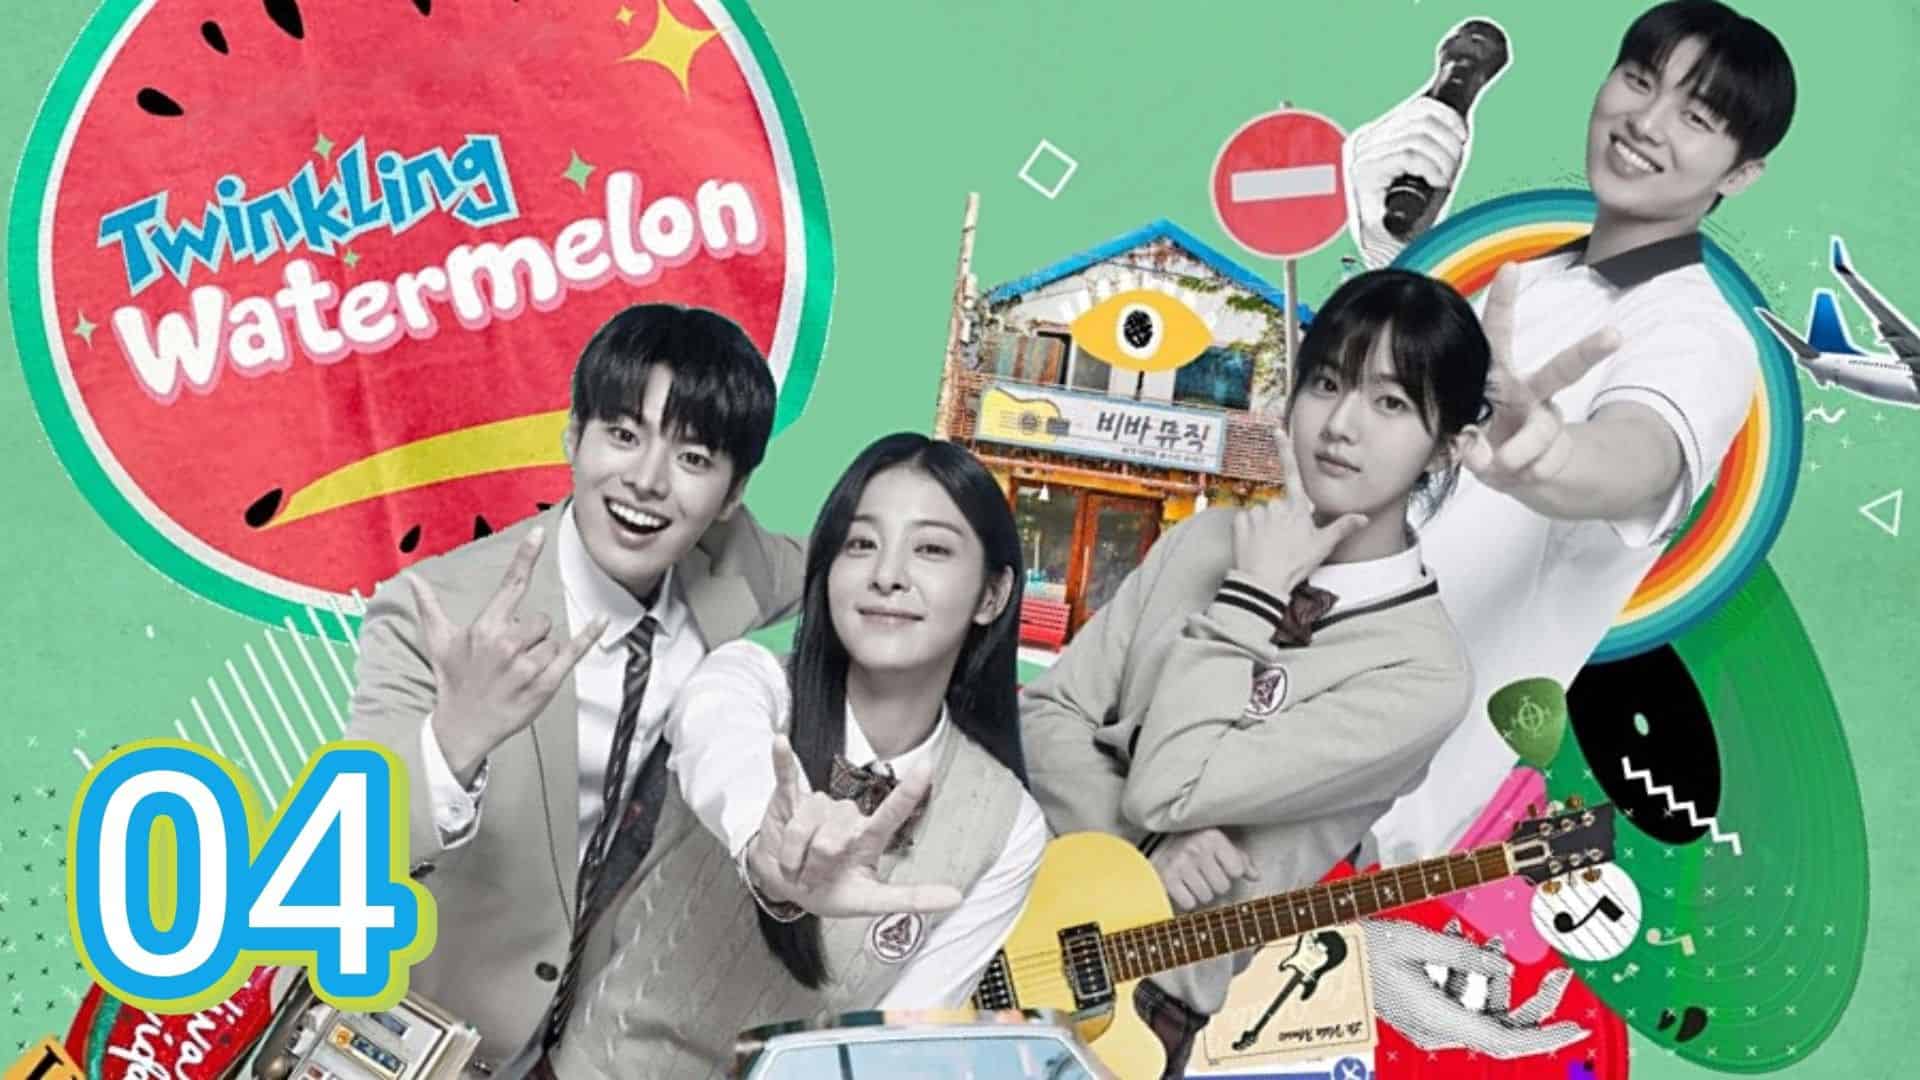 Twinkling Watermelon Episode 7: Release Date, Preview and Streaming Guide